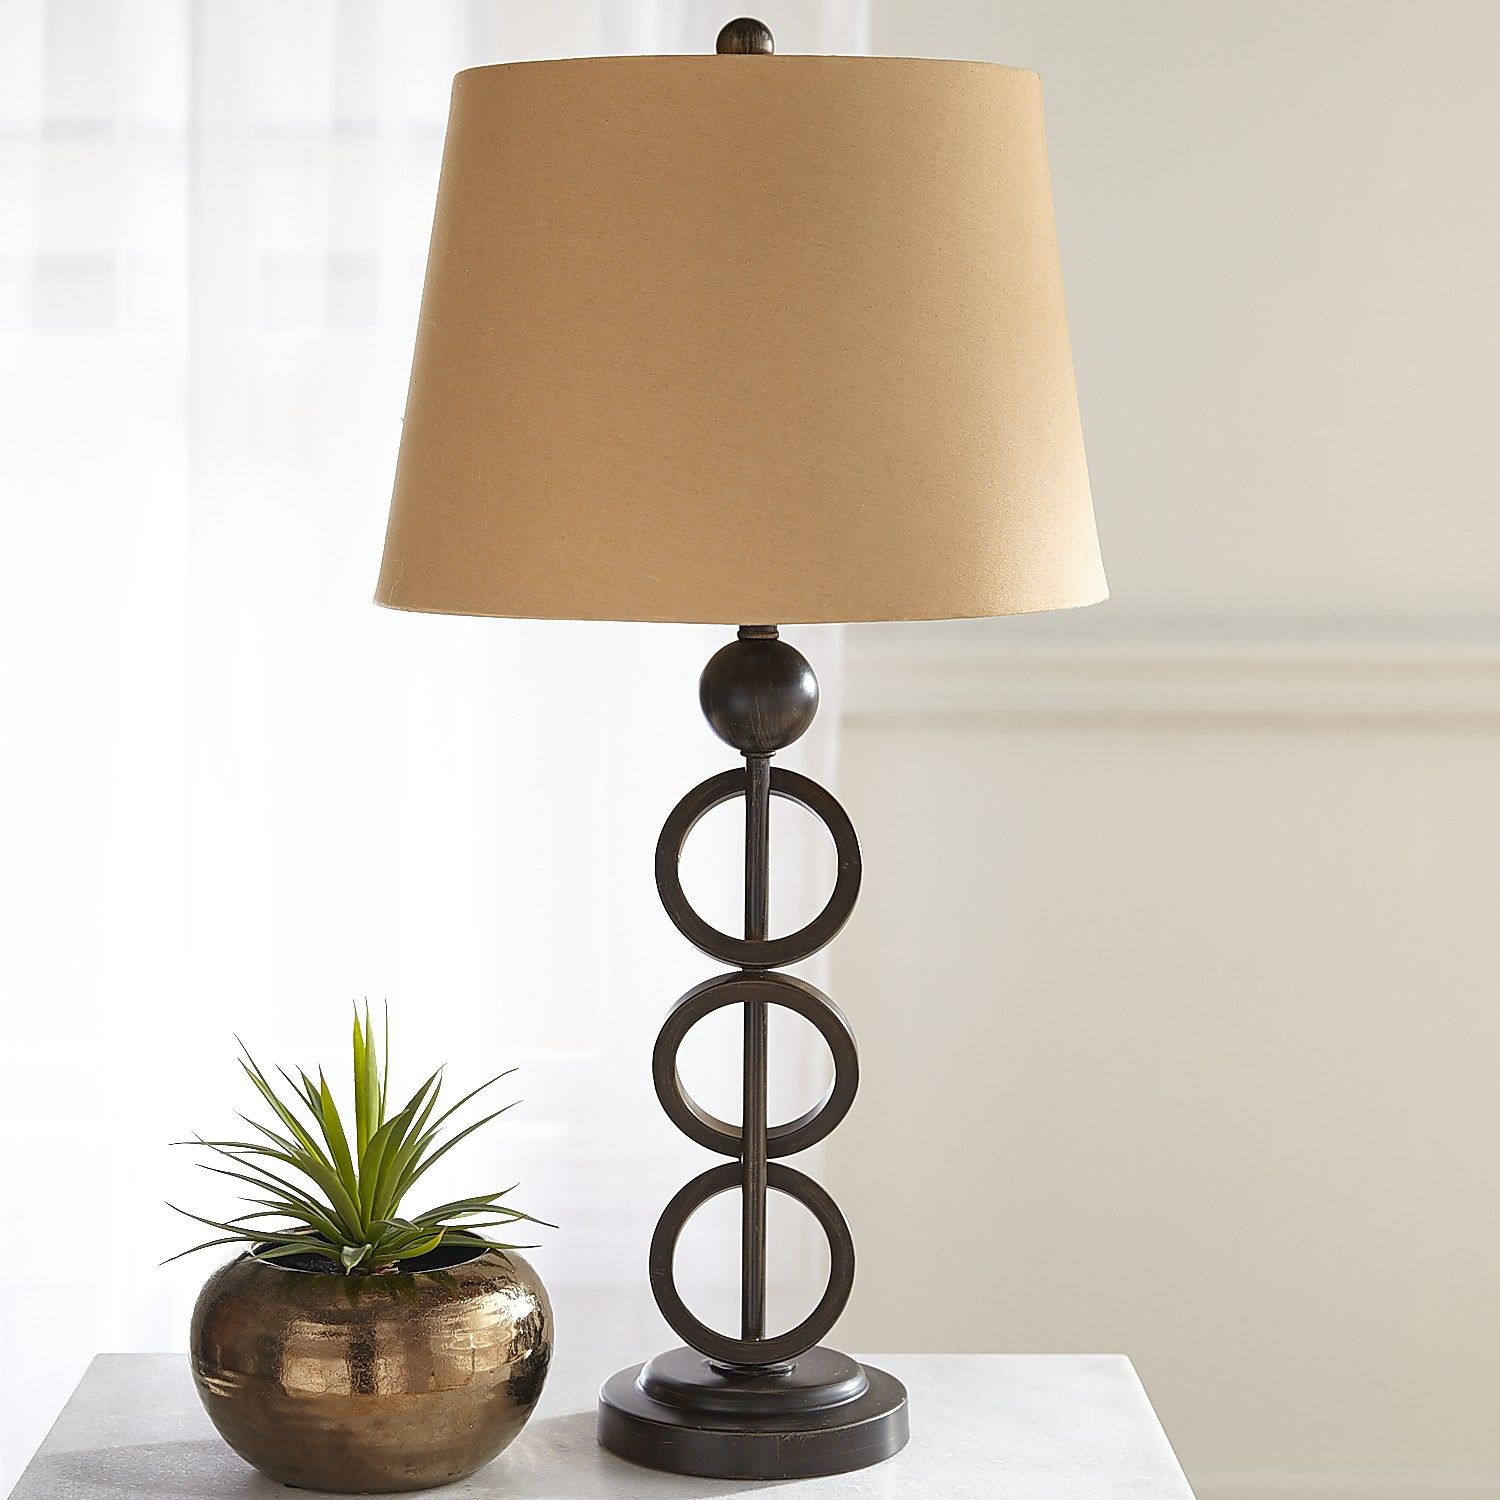 Iron Rings Table Lamp | Pier 1 Imports